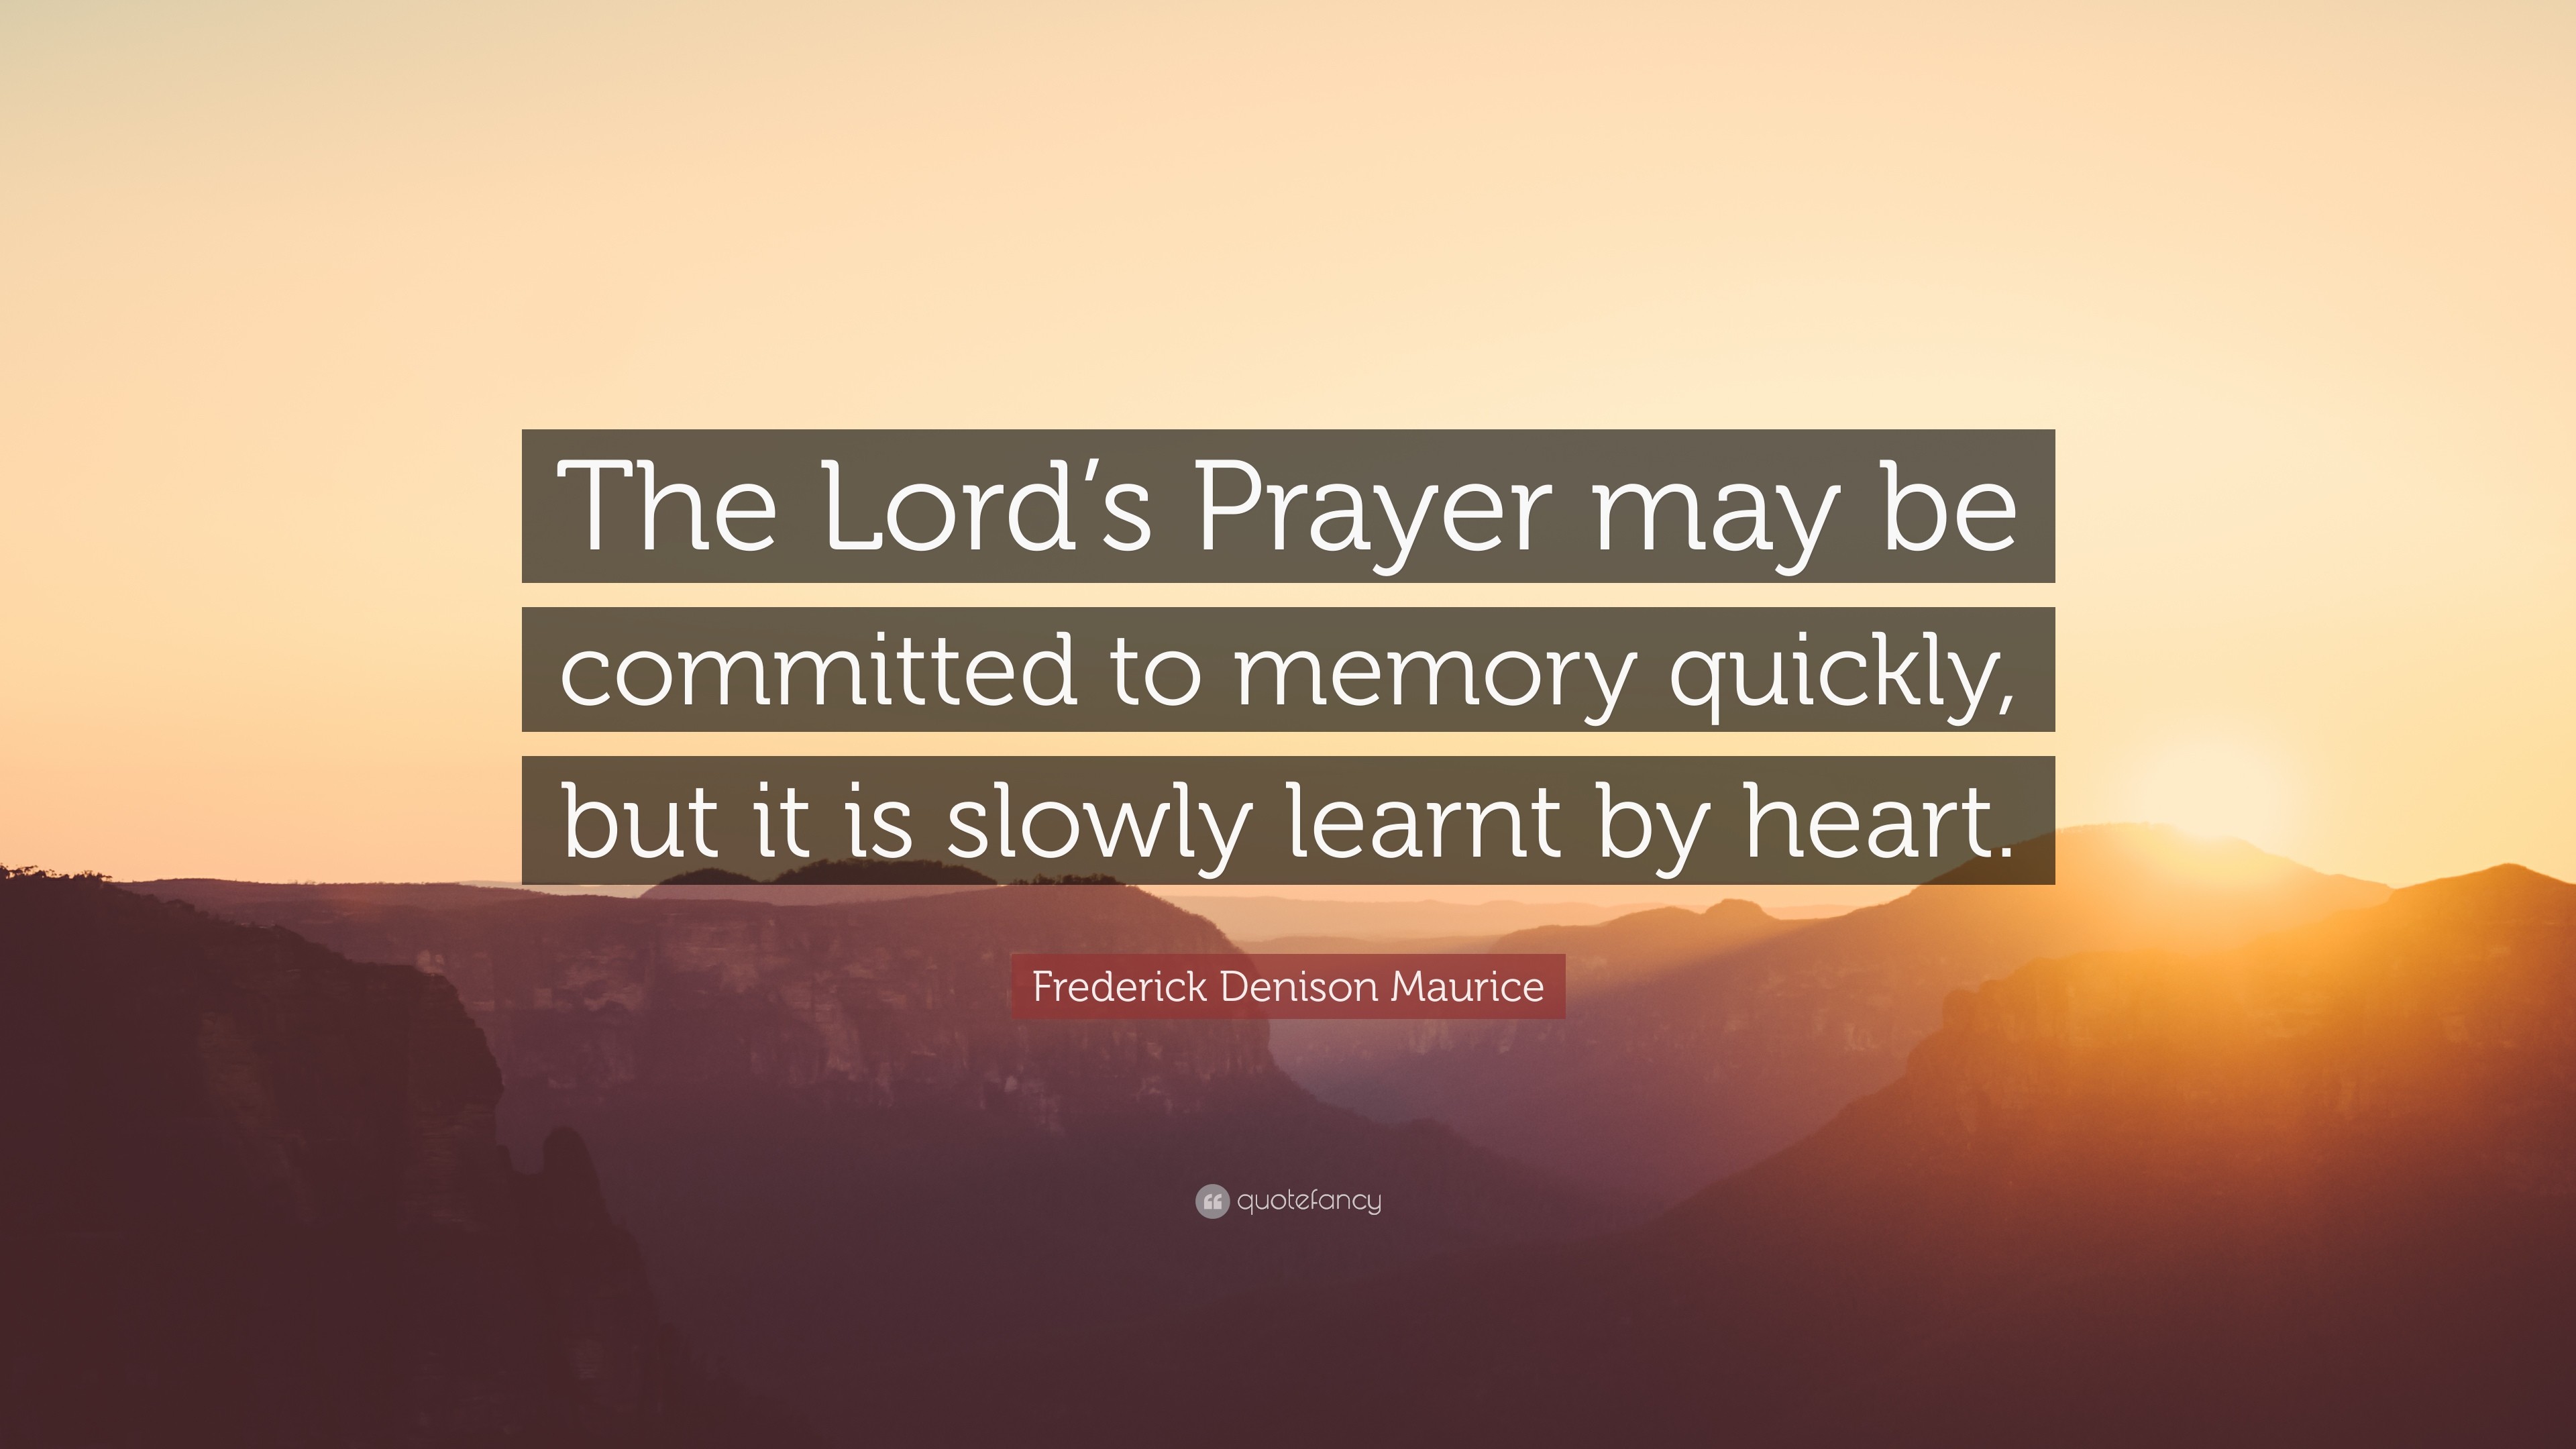 3840x2160 Frederick Denison Maurice Quote: “The Lord's Prayer may be committed to  memory quickly,